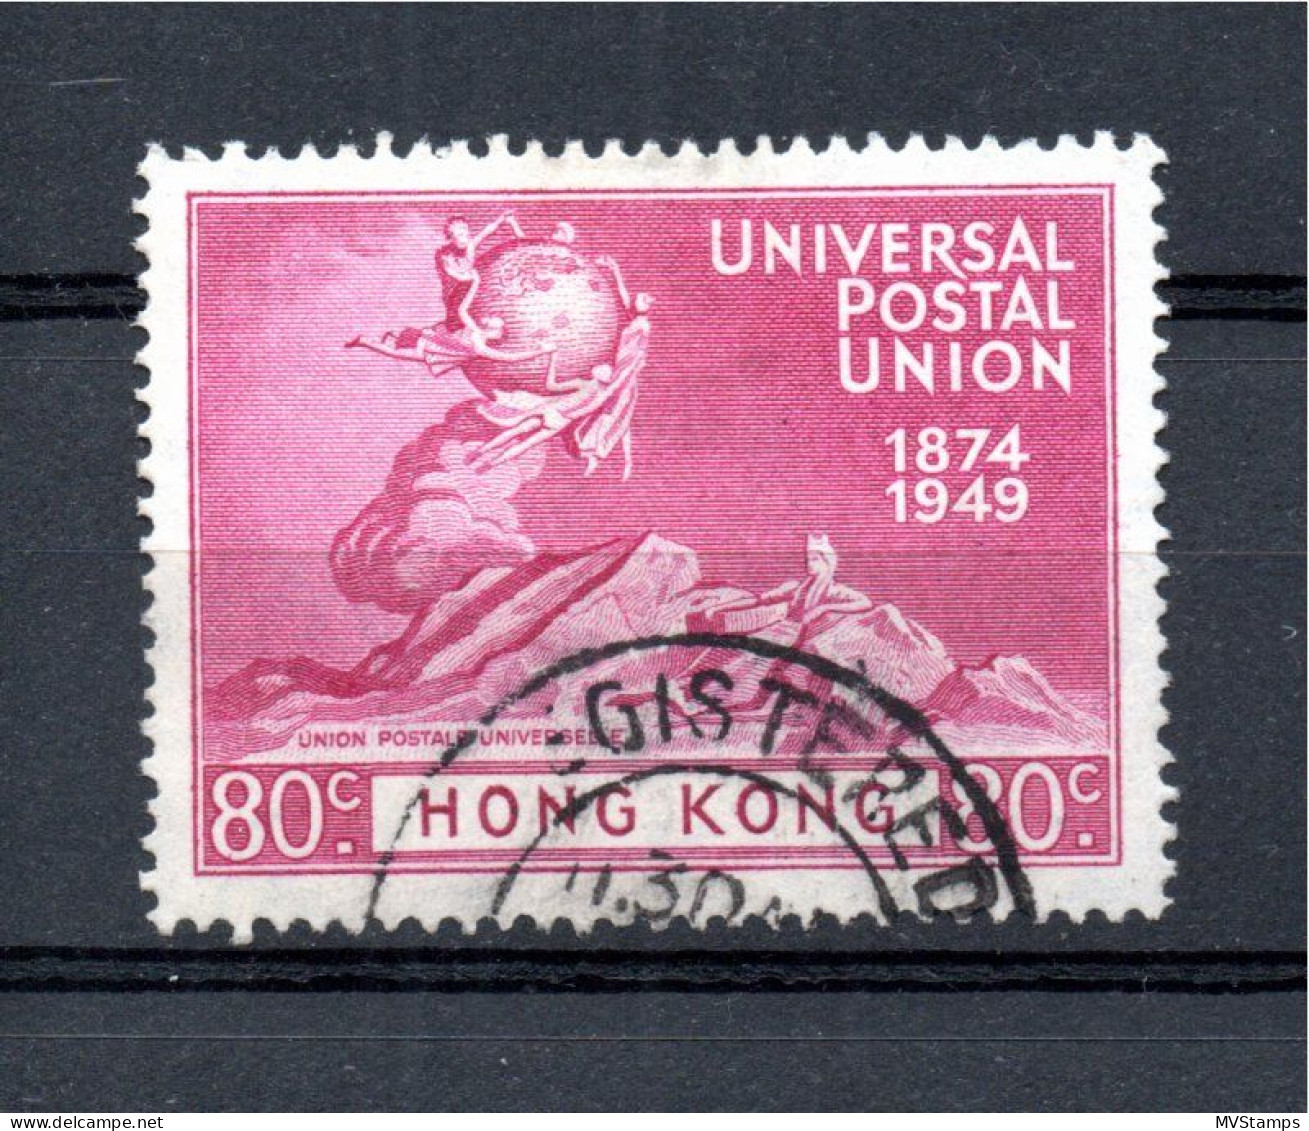 Hong Kong 1949 Old 80 Cents UPU Stamp (Michel 176) Nice Used - Oblitérés